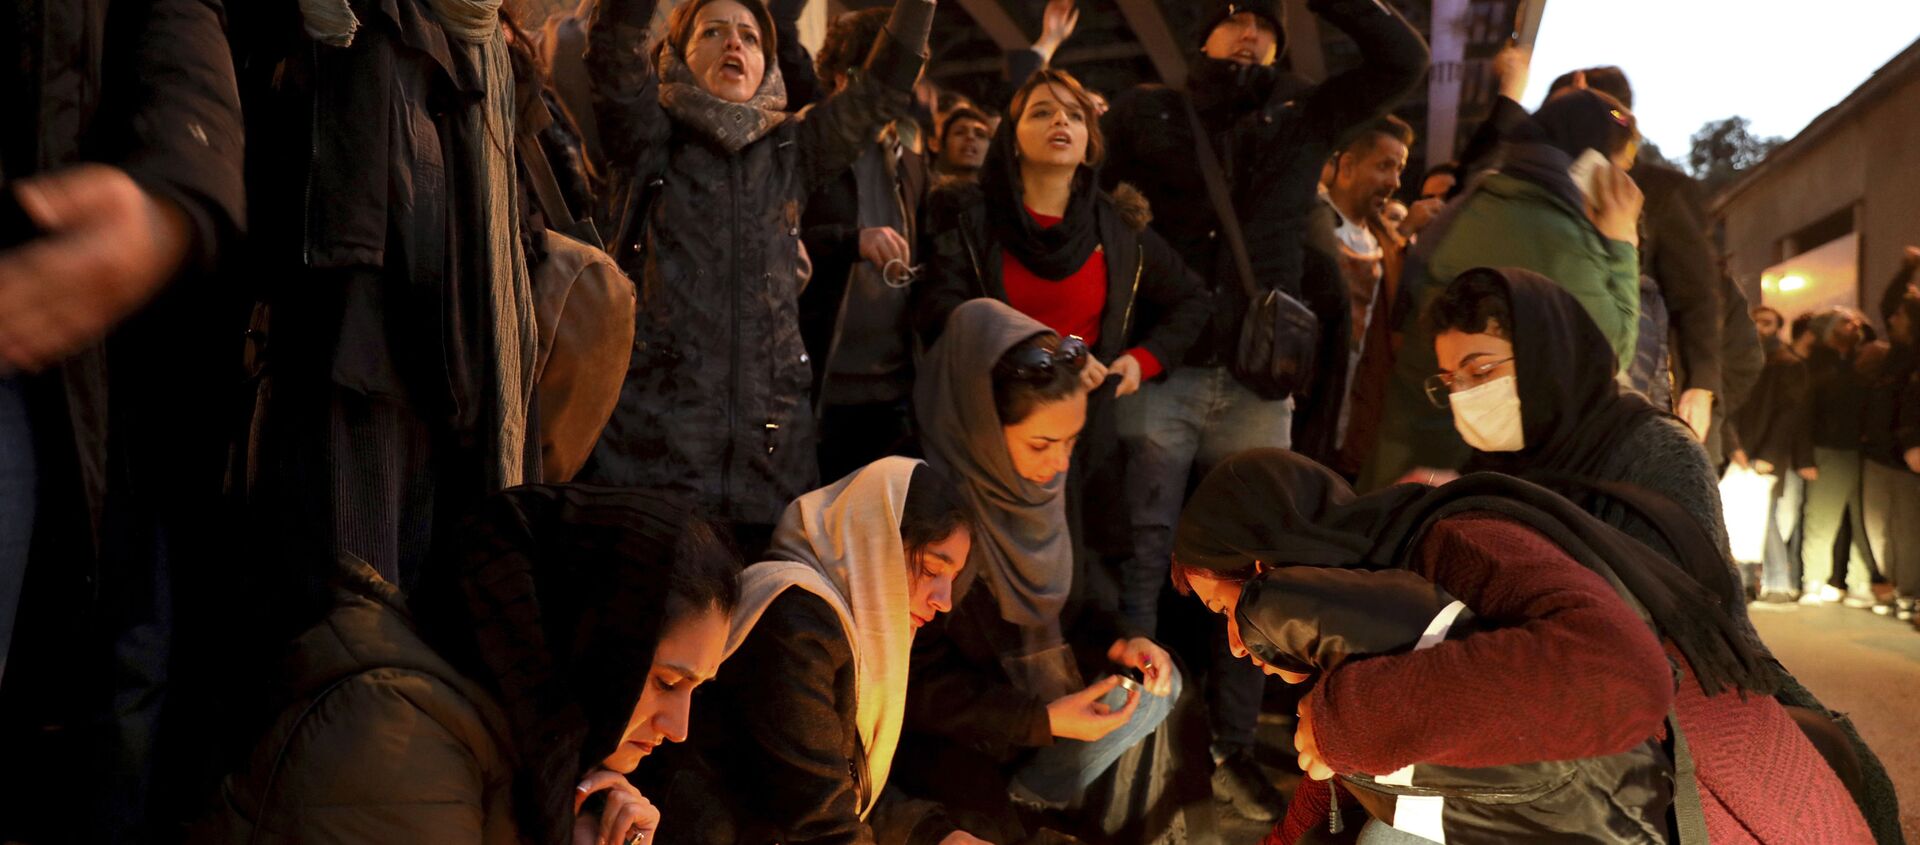 People gather for a candlelight vigil to remember the victims of the Ukraine plane crash, at the gate of Amri Kabir University, which some of the victims of the crash were former students of, in Tehran, Iran, on Saturday, 11 January 2020. On that day, Iran acknowledged that its armed forces unintentionally shot down the Ukrainian jetliner that crashed earlier this week, killing all 176 aboard, after the government had repeatedly denied Western accusations that it was responsible. - Sputnik International, 1920, 13.01.2020